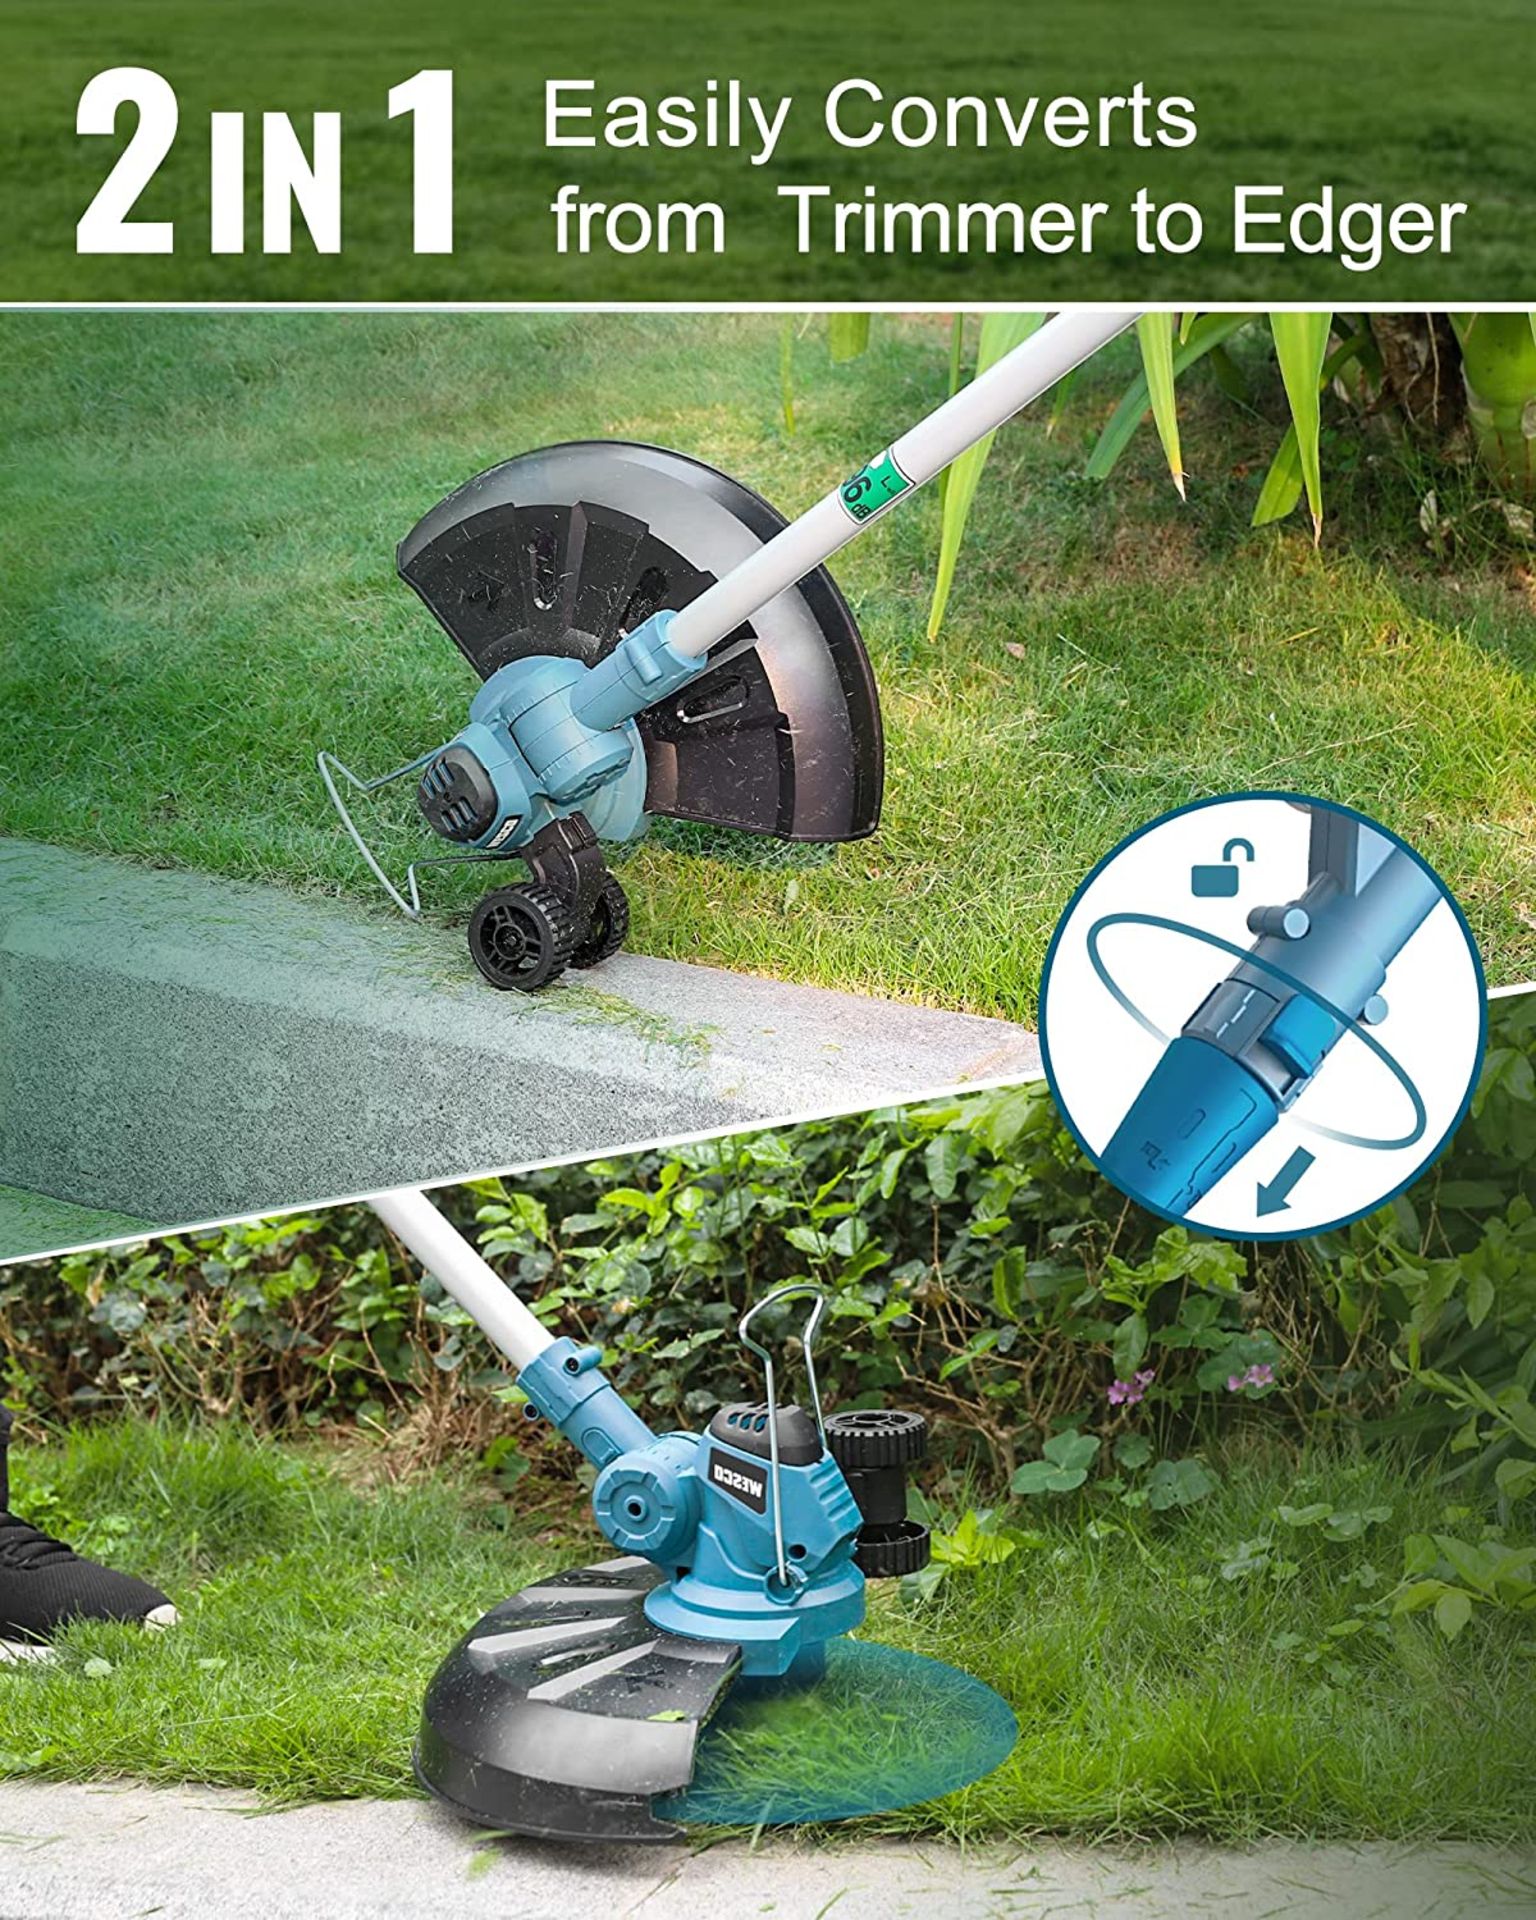 New Boxed WESCO Cordless 2 in 1 Electric String Trimmer/Edger 18V with 2.0Ah Battery, Cutting - Image 2 of 2